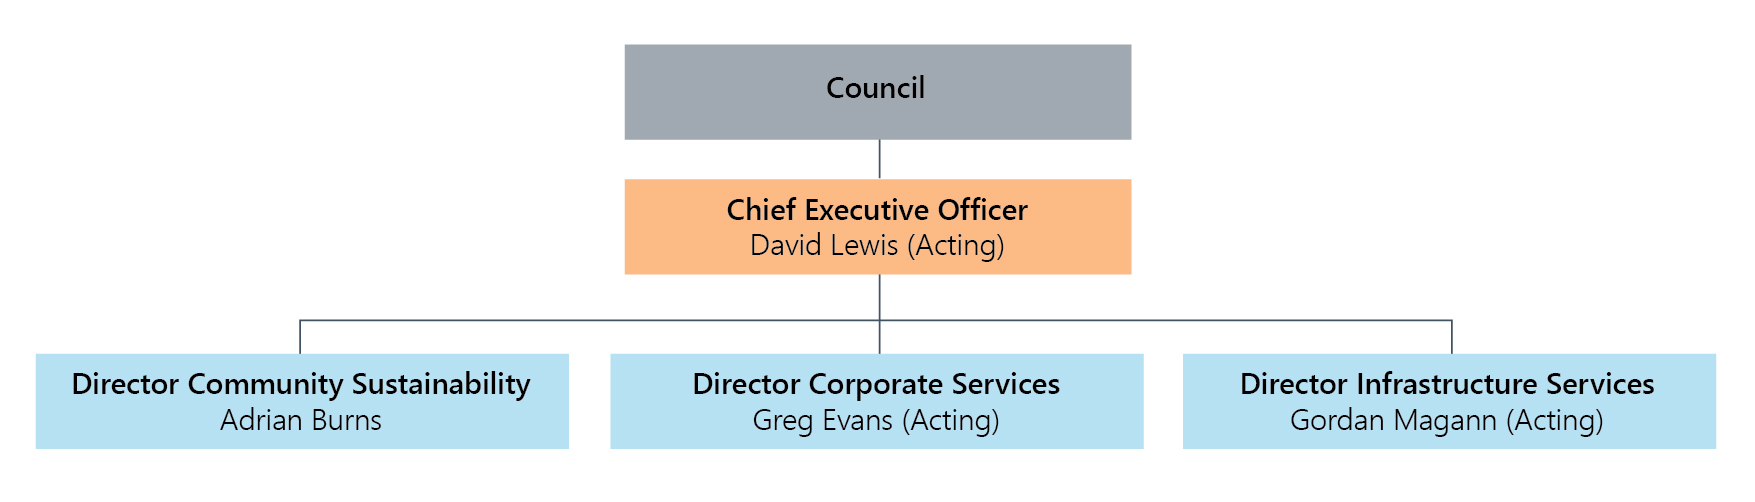 Organisations structure director level